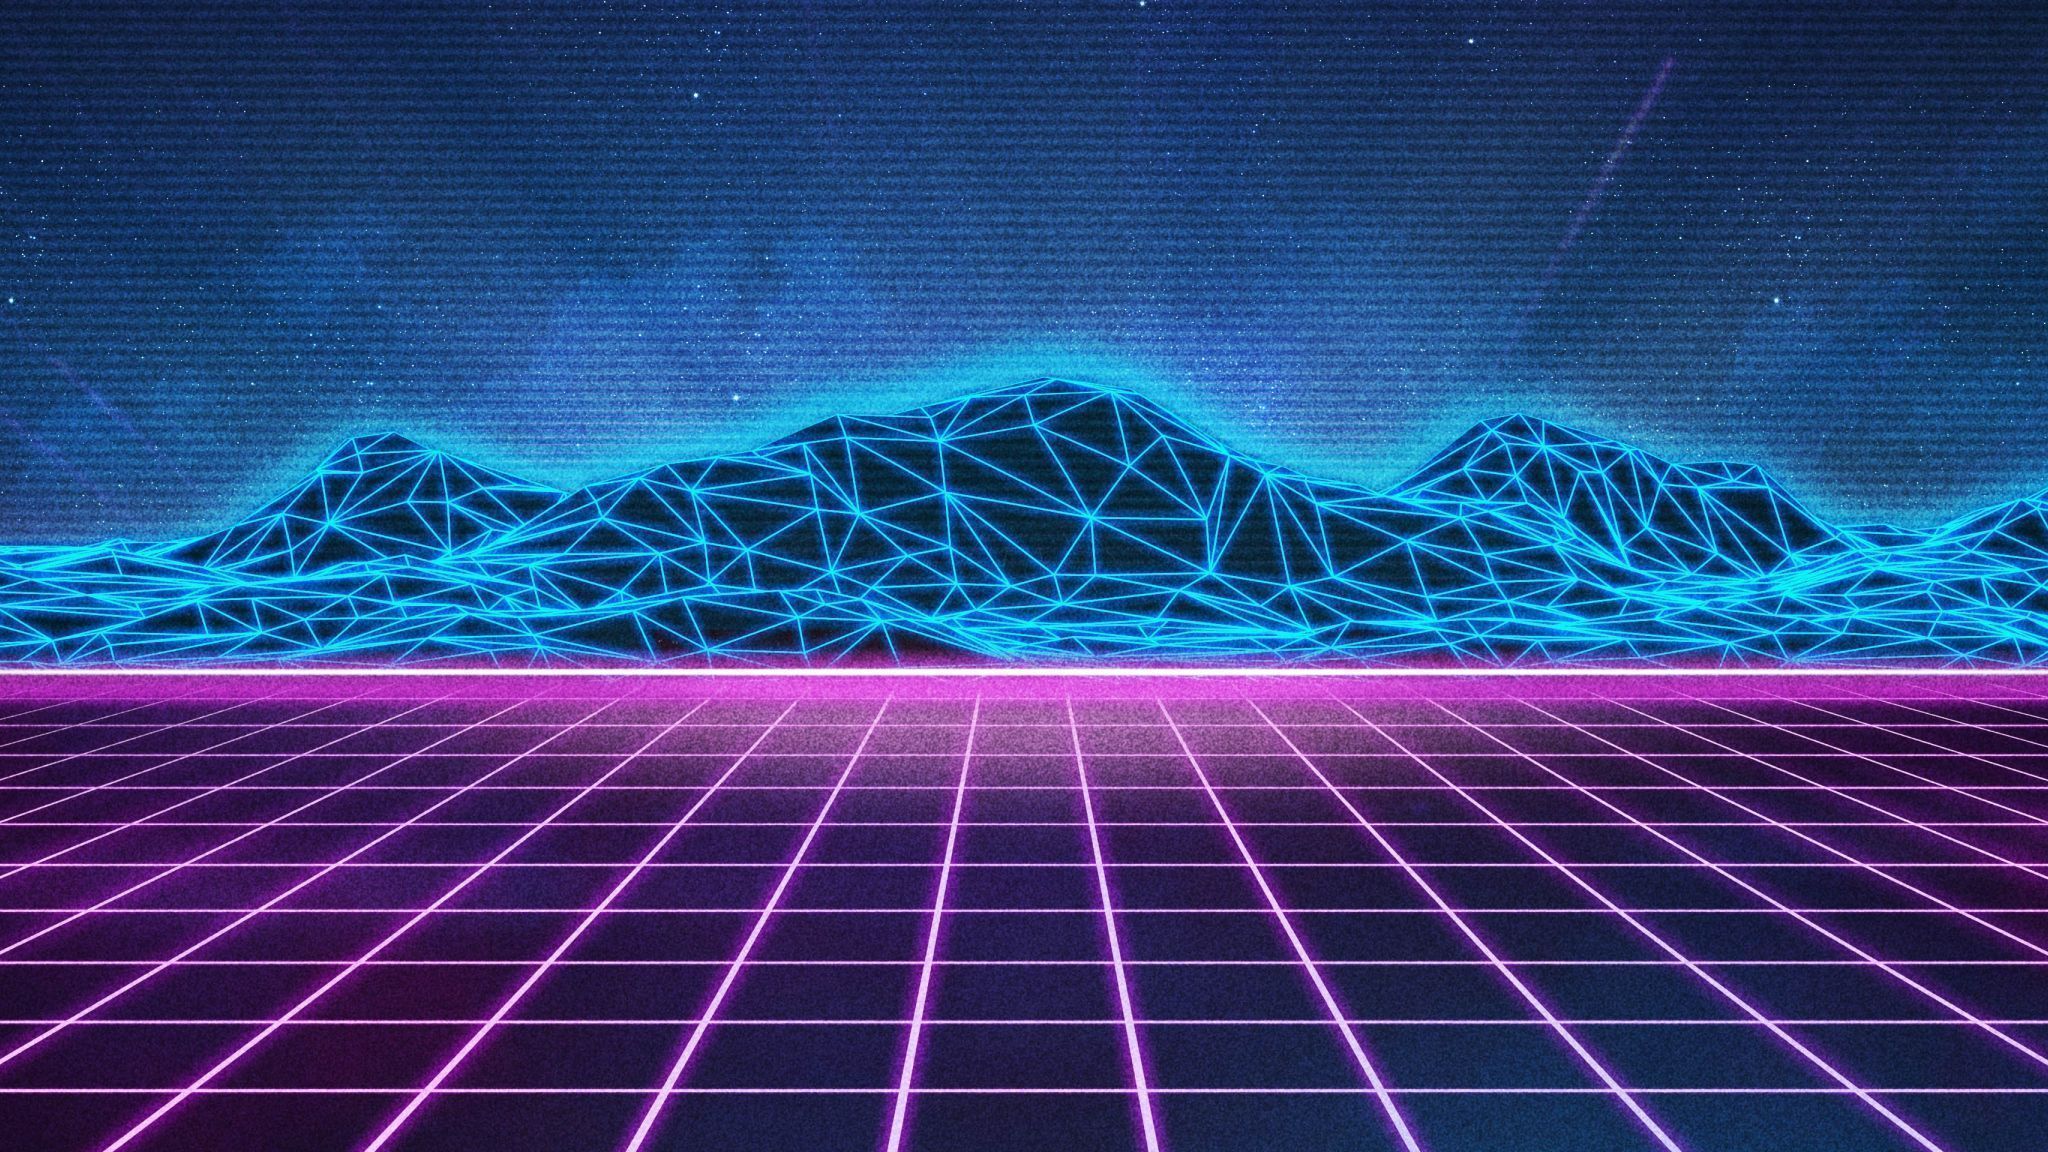 Synthwave wallpaper in 2048x1152 resolution